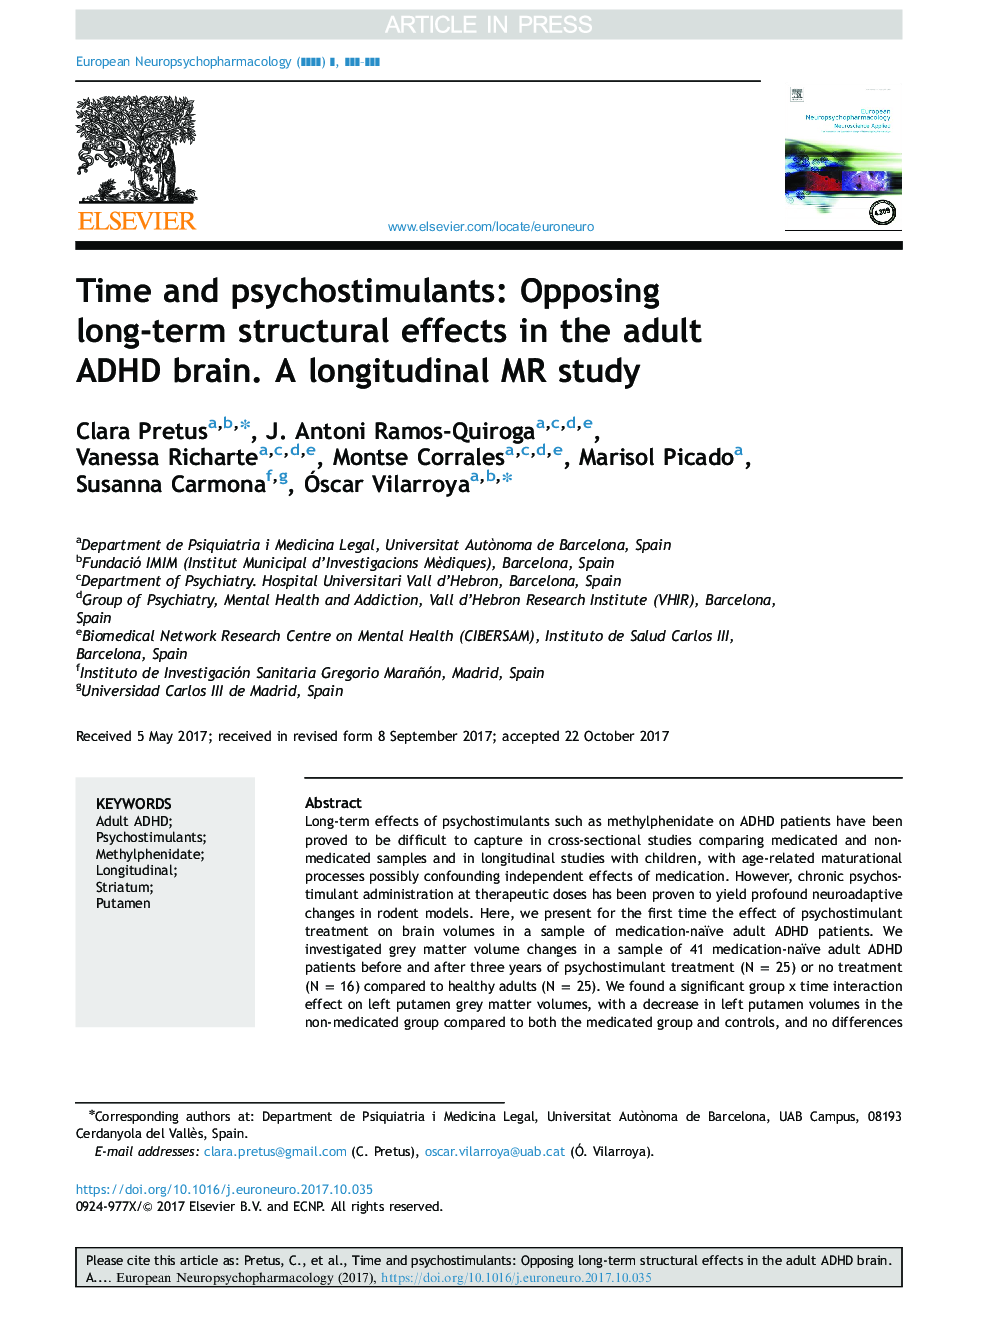 Time and psychostimulants: Opposing long-term structural effects in the adult ADHD brain. A longitudinal MR study